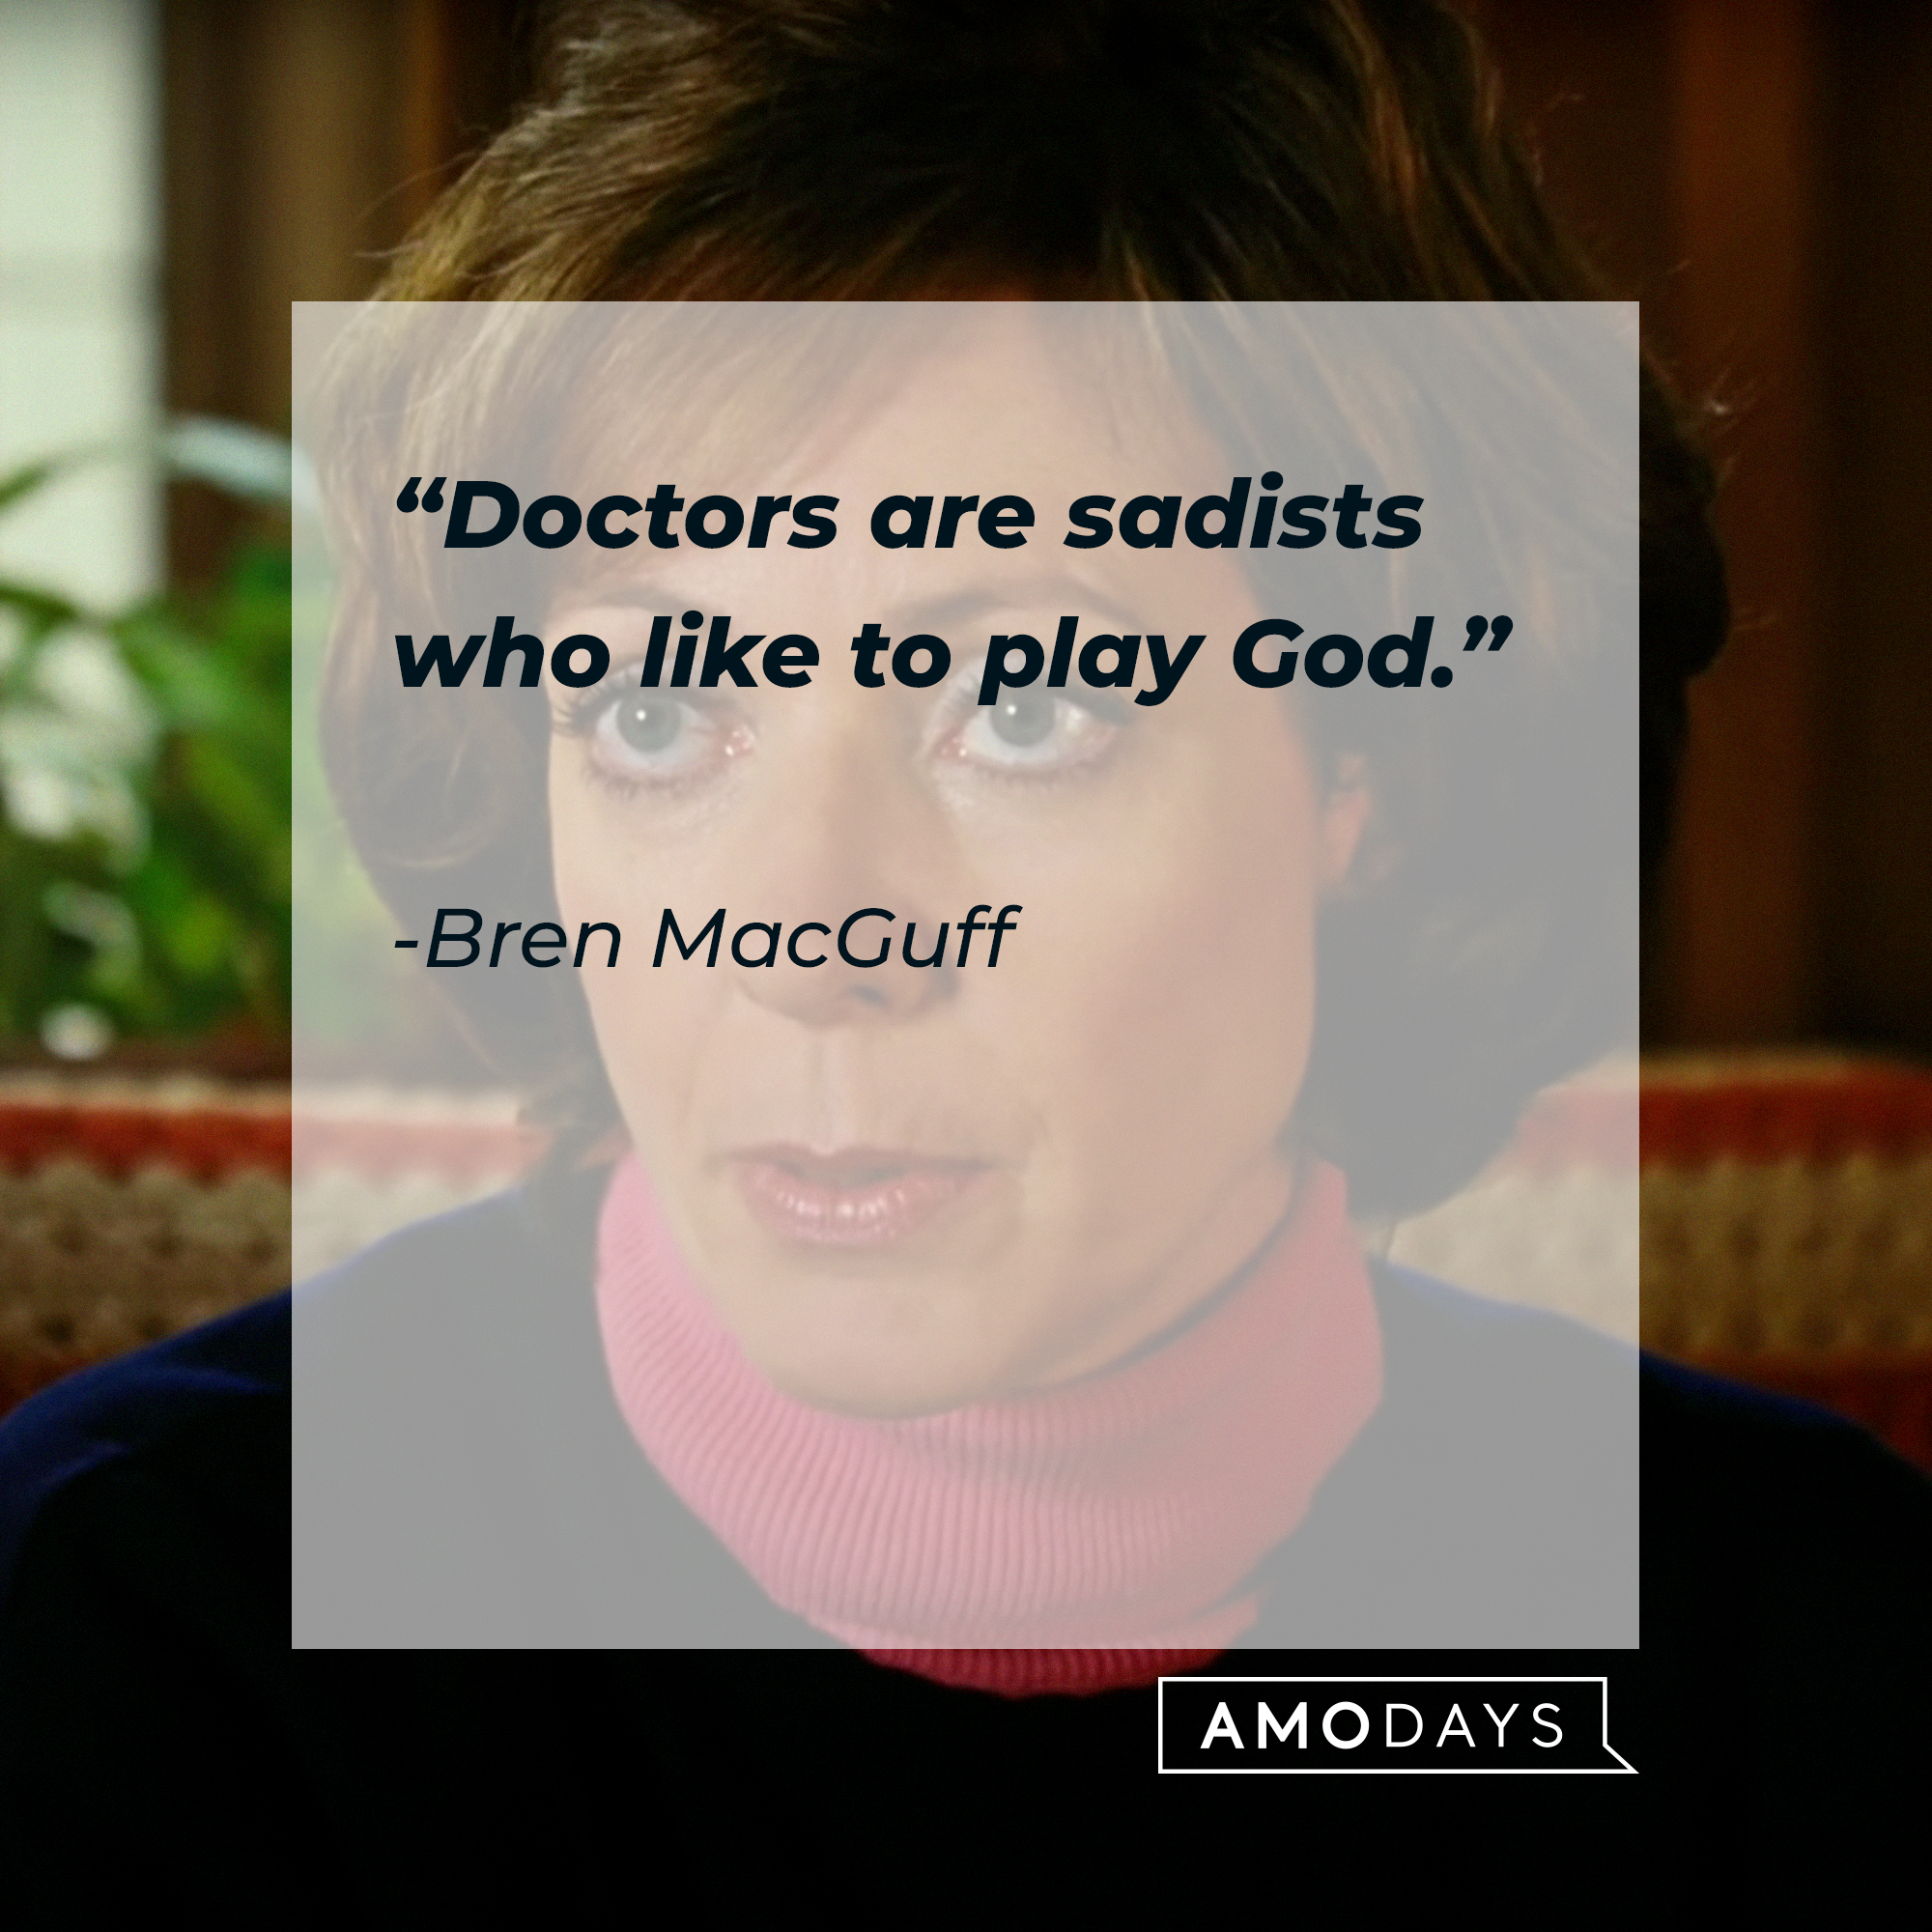 Bren MacGuff, with his quote: “Doctors are sadists who like to play God.” | Source: Facebook.com/JunoTheMovie